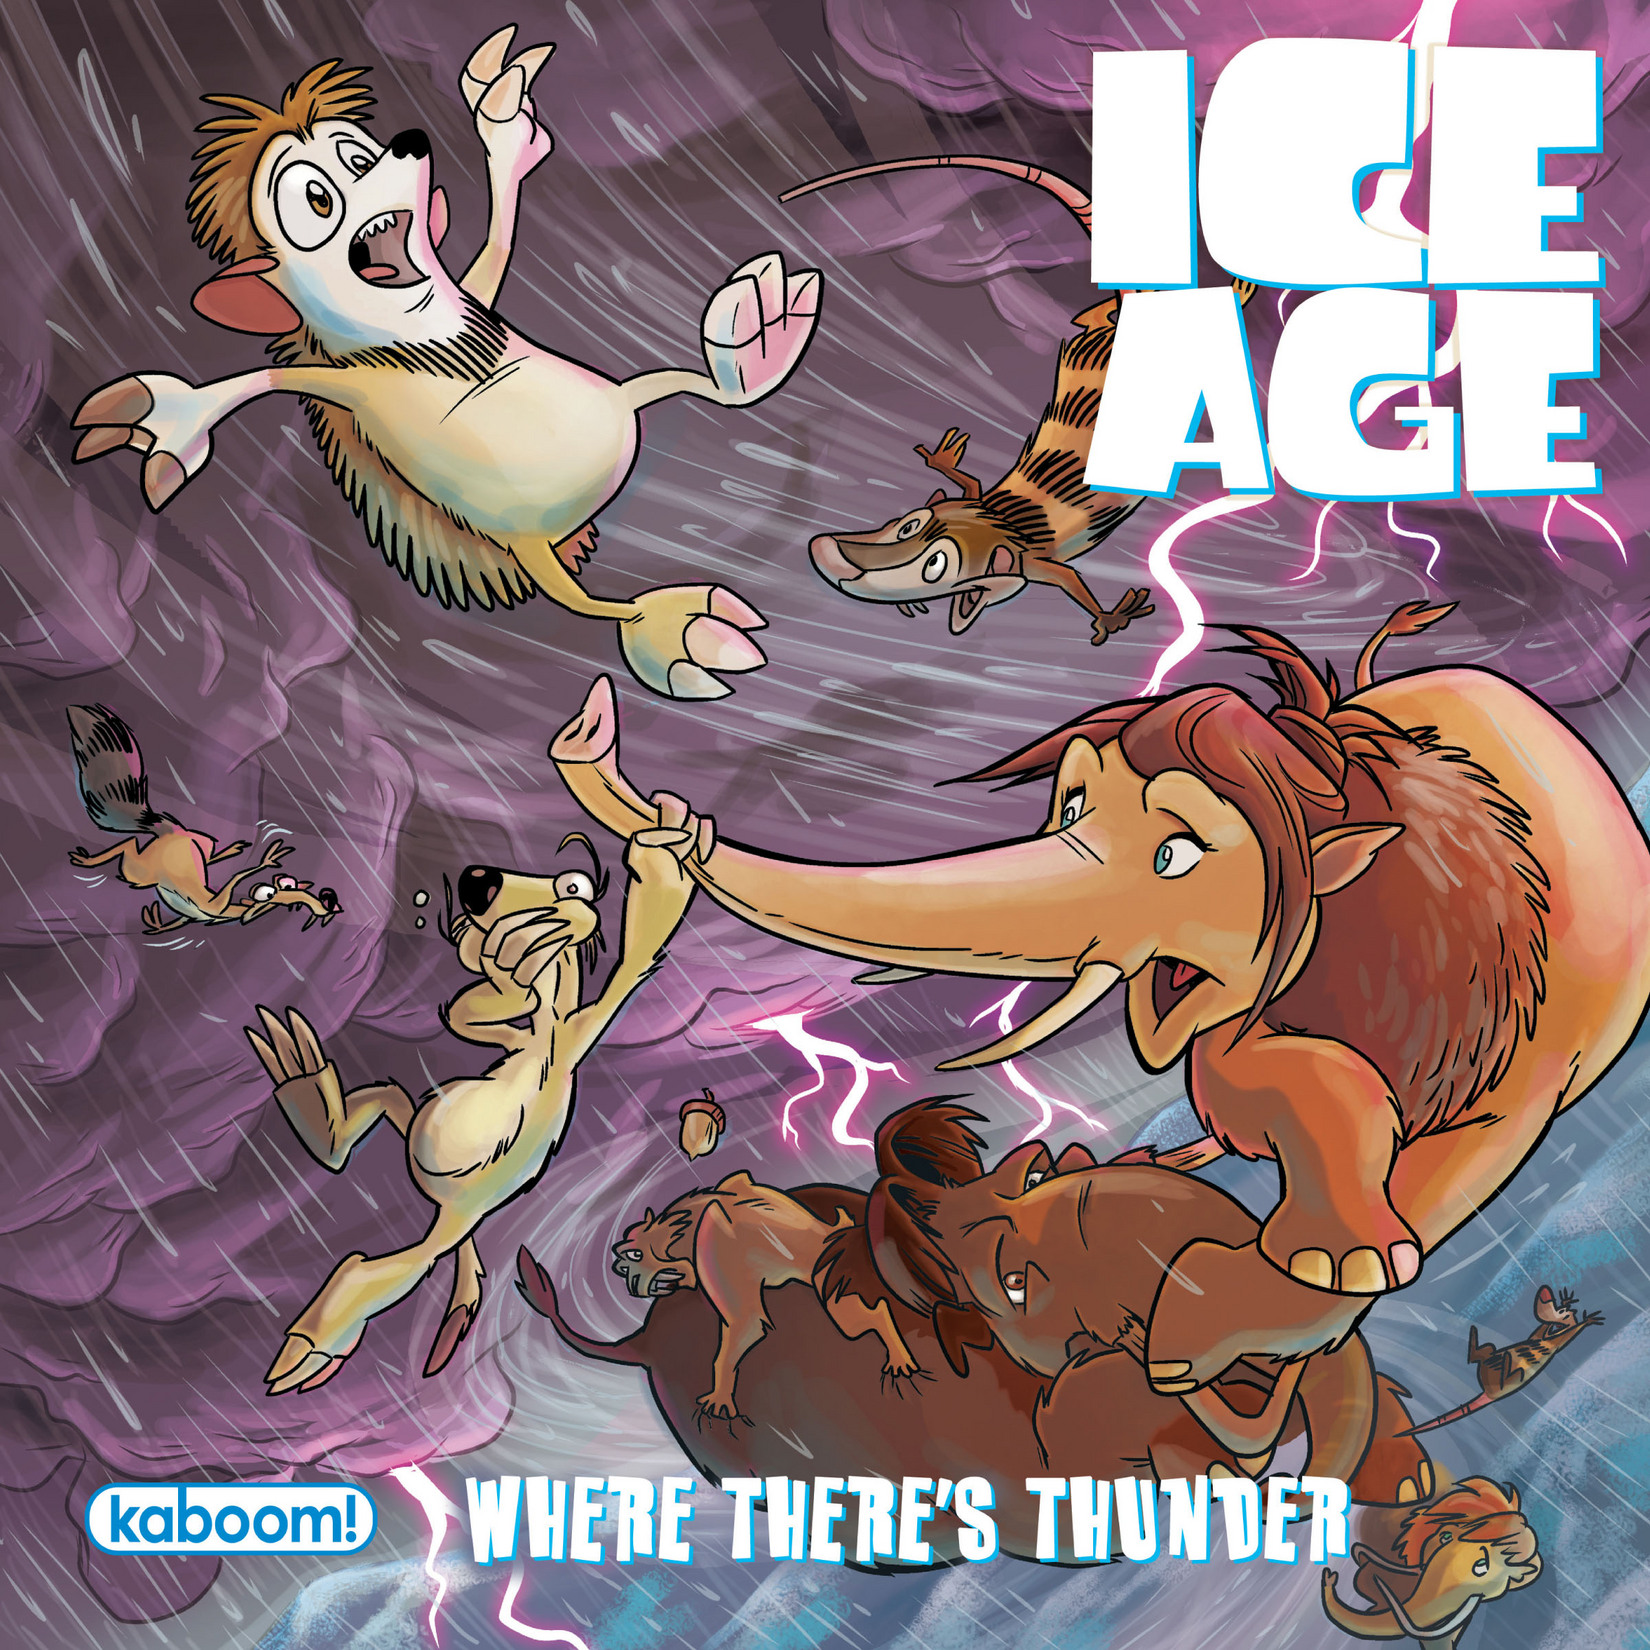 Read online Ice Age: Where There's Thunder comic -  Issue # Full - 1